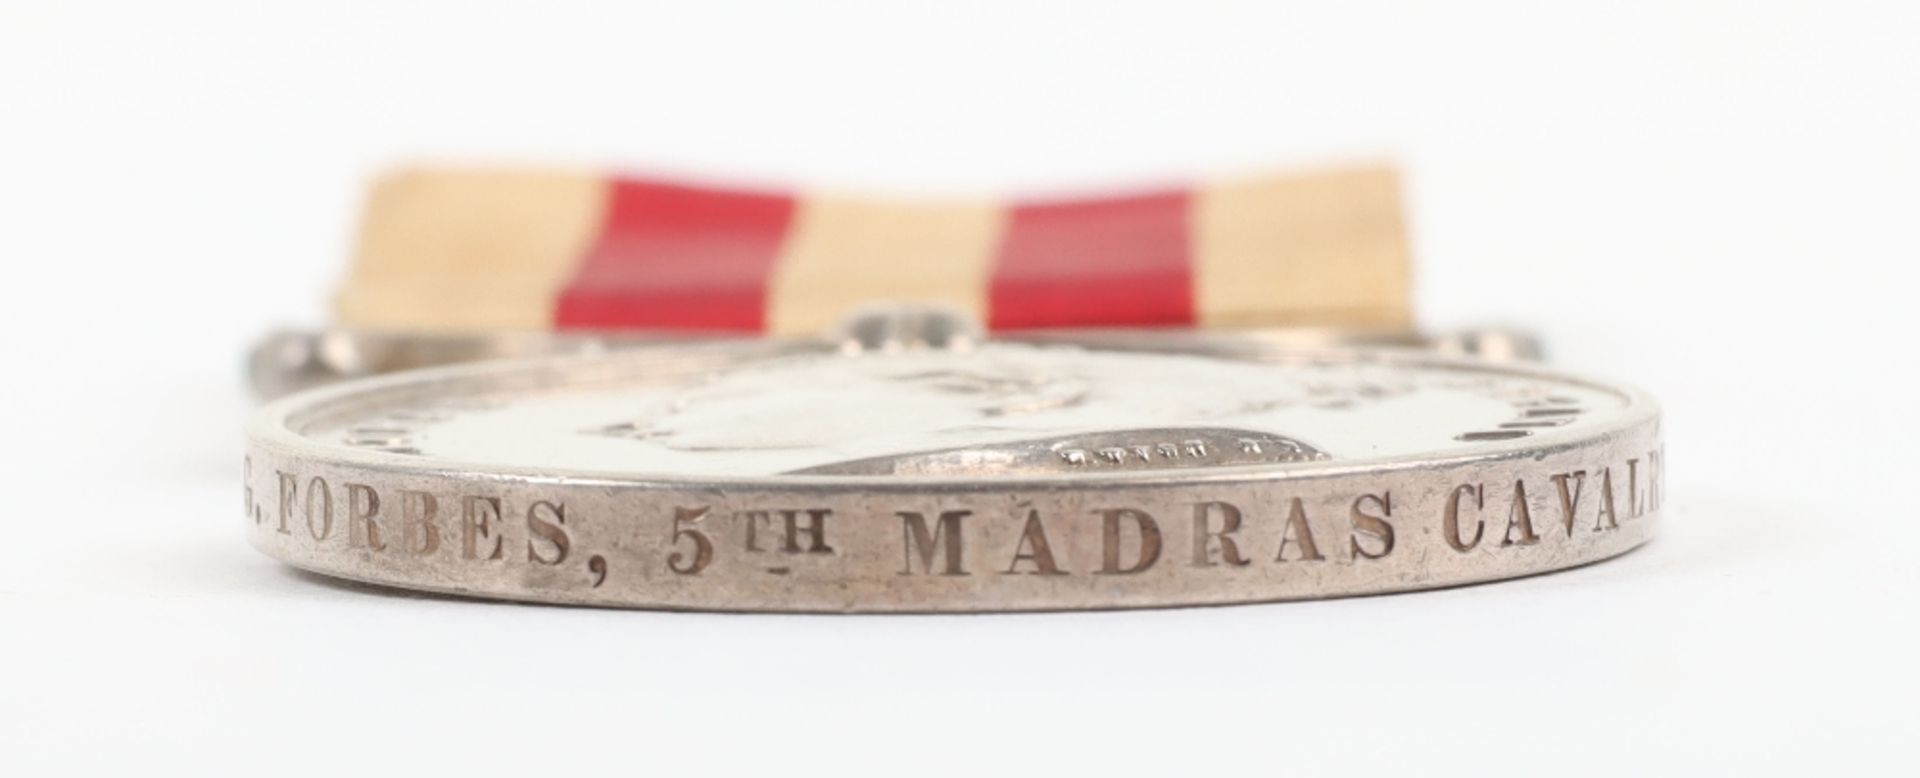 Indian Mutiny Medal 1857-59 Awarded to a Captain in the Madras Cavalry - Image 3 of 3